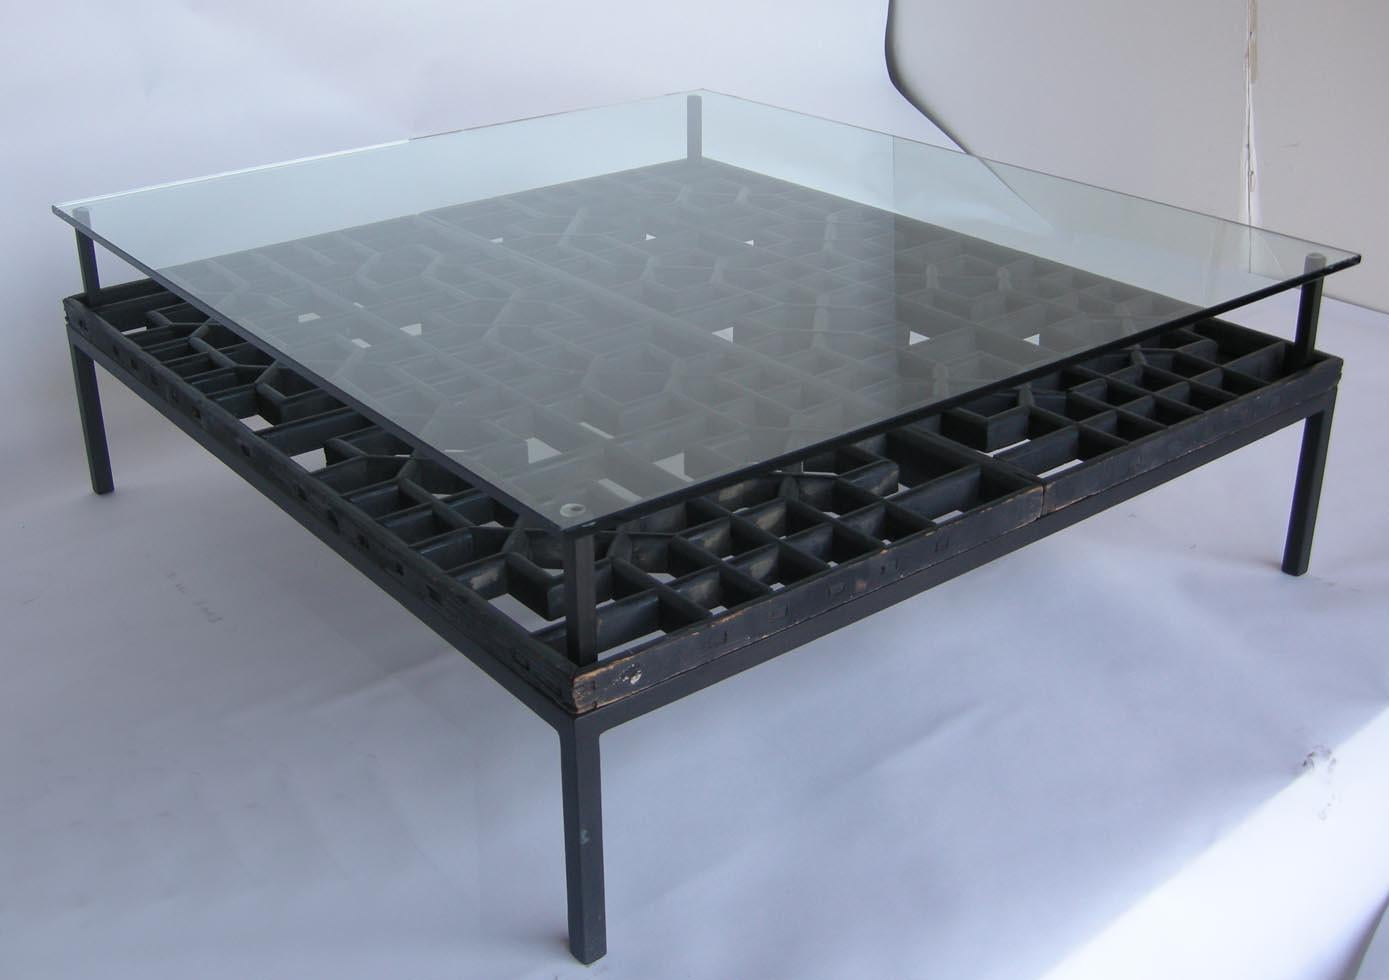 Anglo-Japanese Japanese Fret Work Wooden Lattice Coffee Table with Glass Top